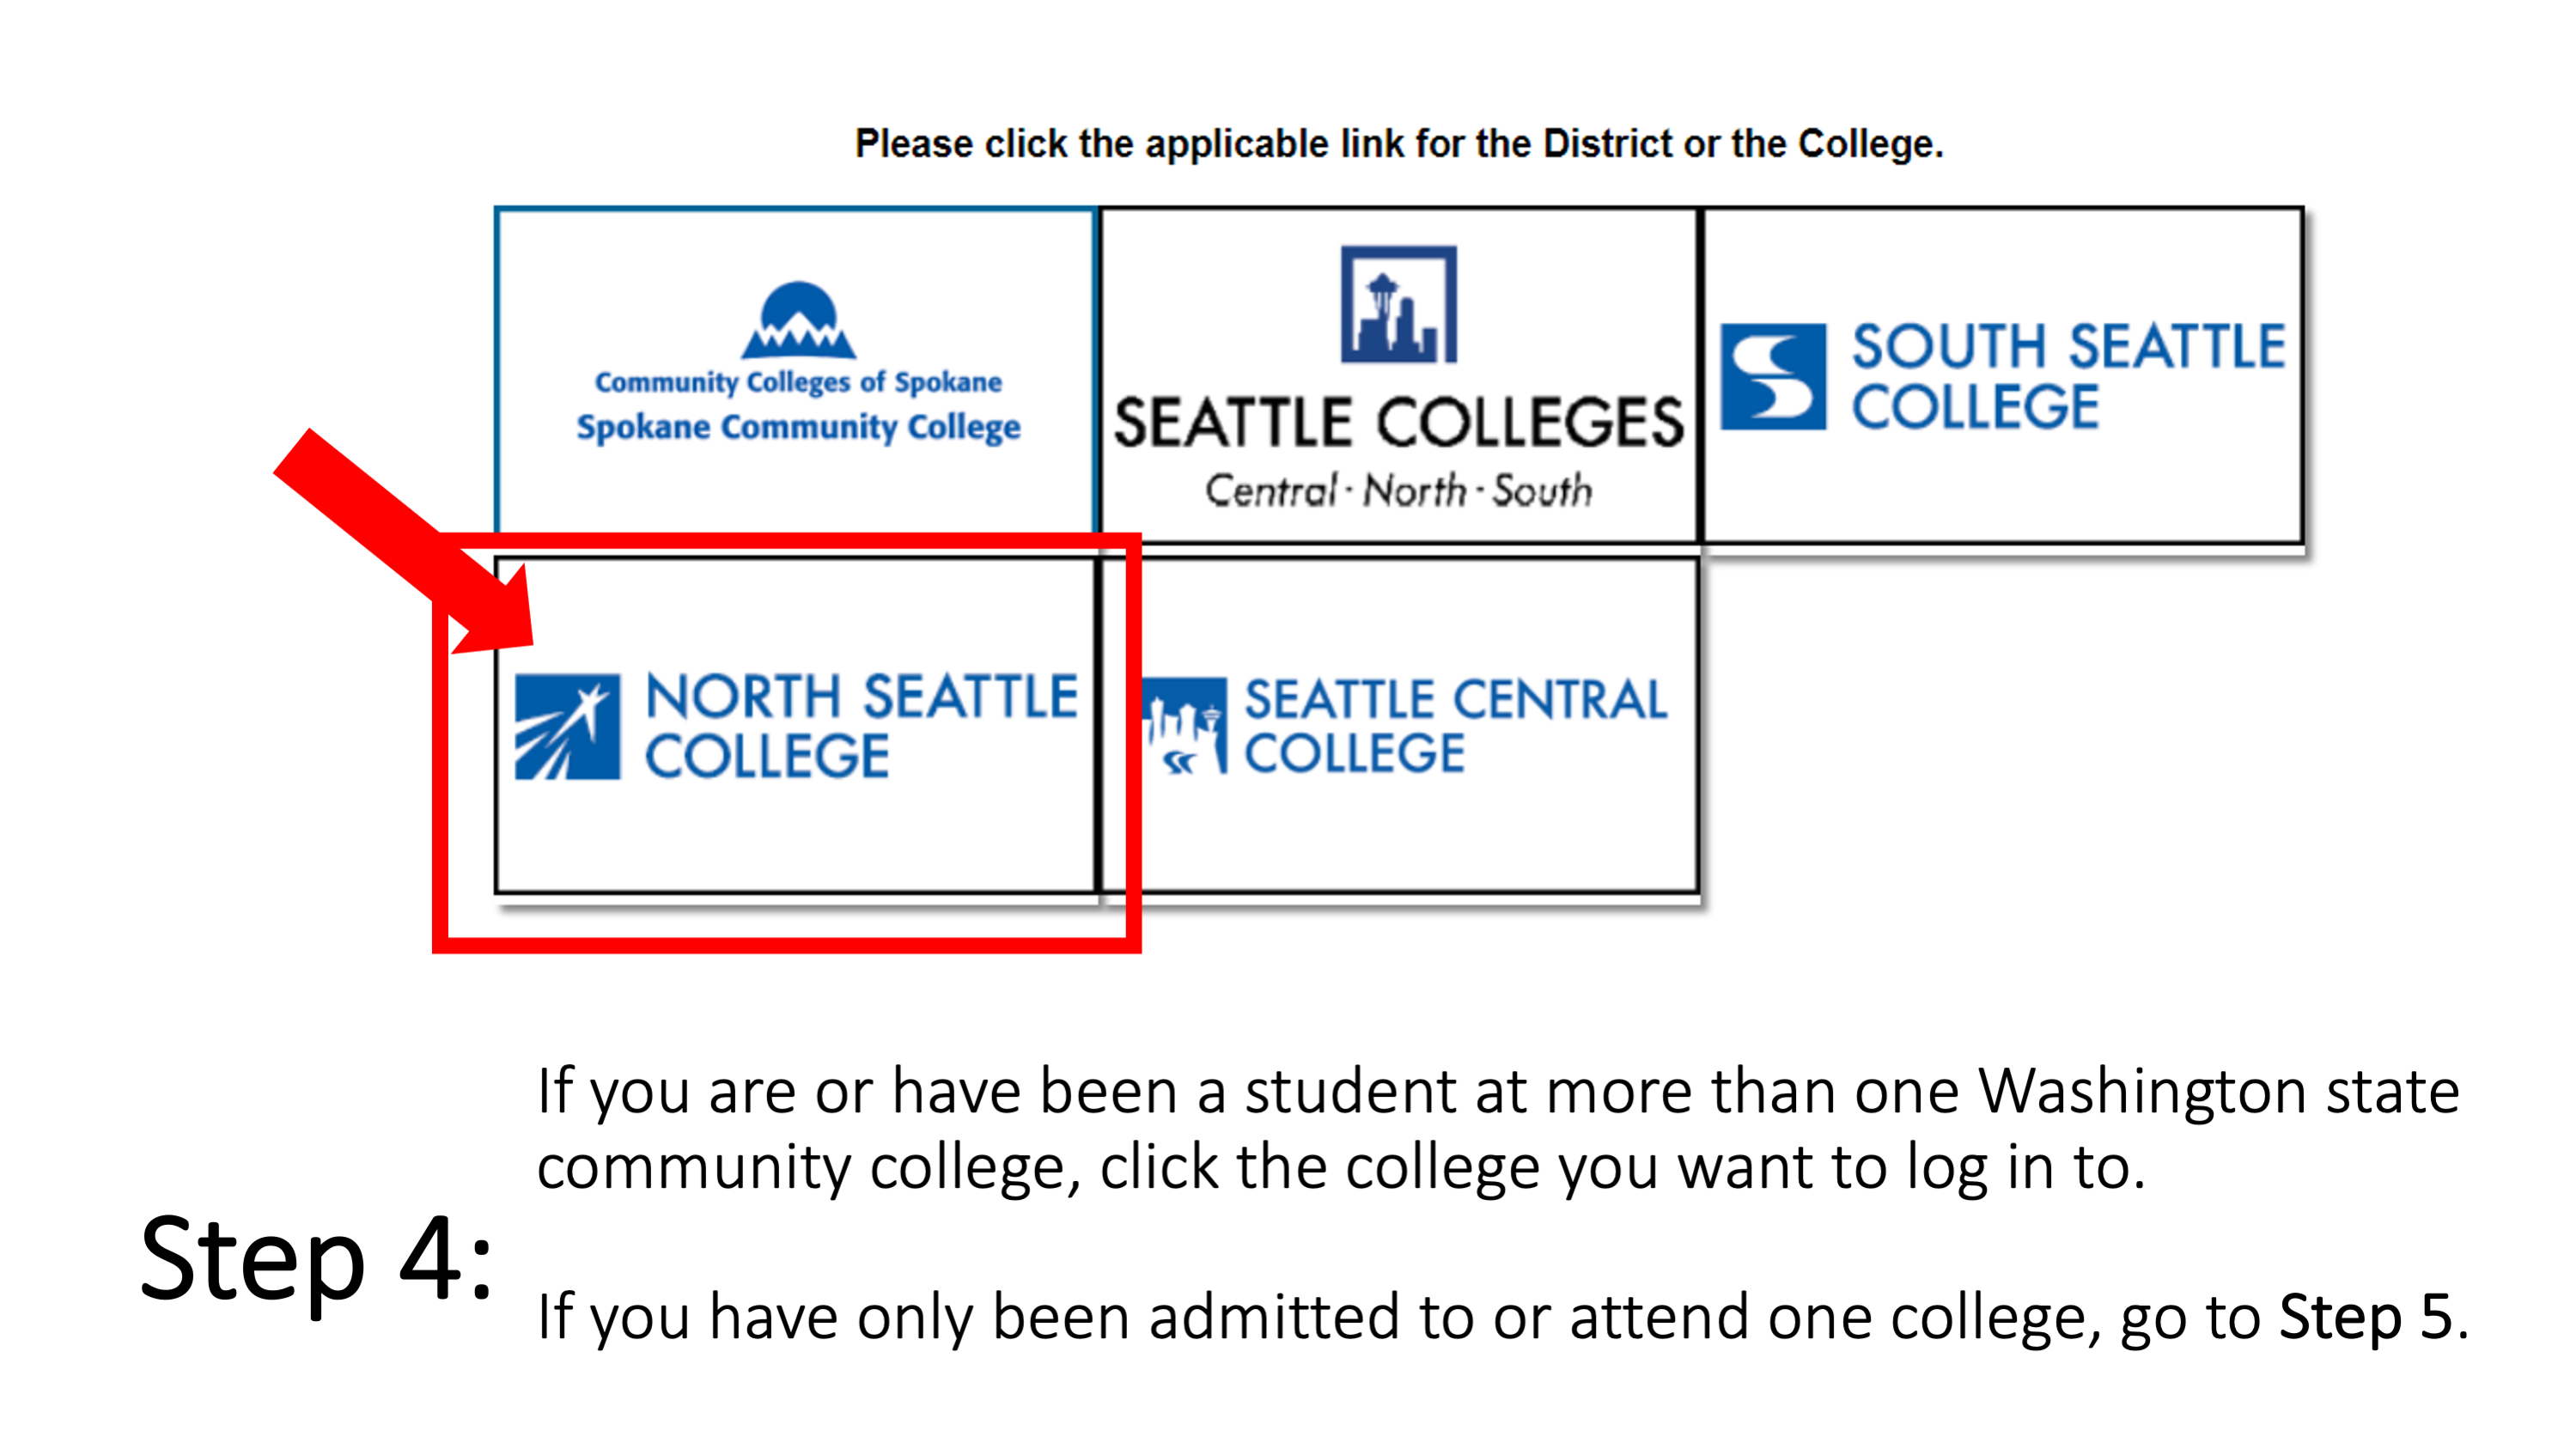 Step 4: If you are or have been a student at more than one Washington state community college, click the college you want to log in to. If you have only been admitted to or attend one college, go to Step 5.